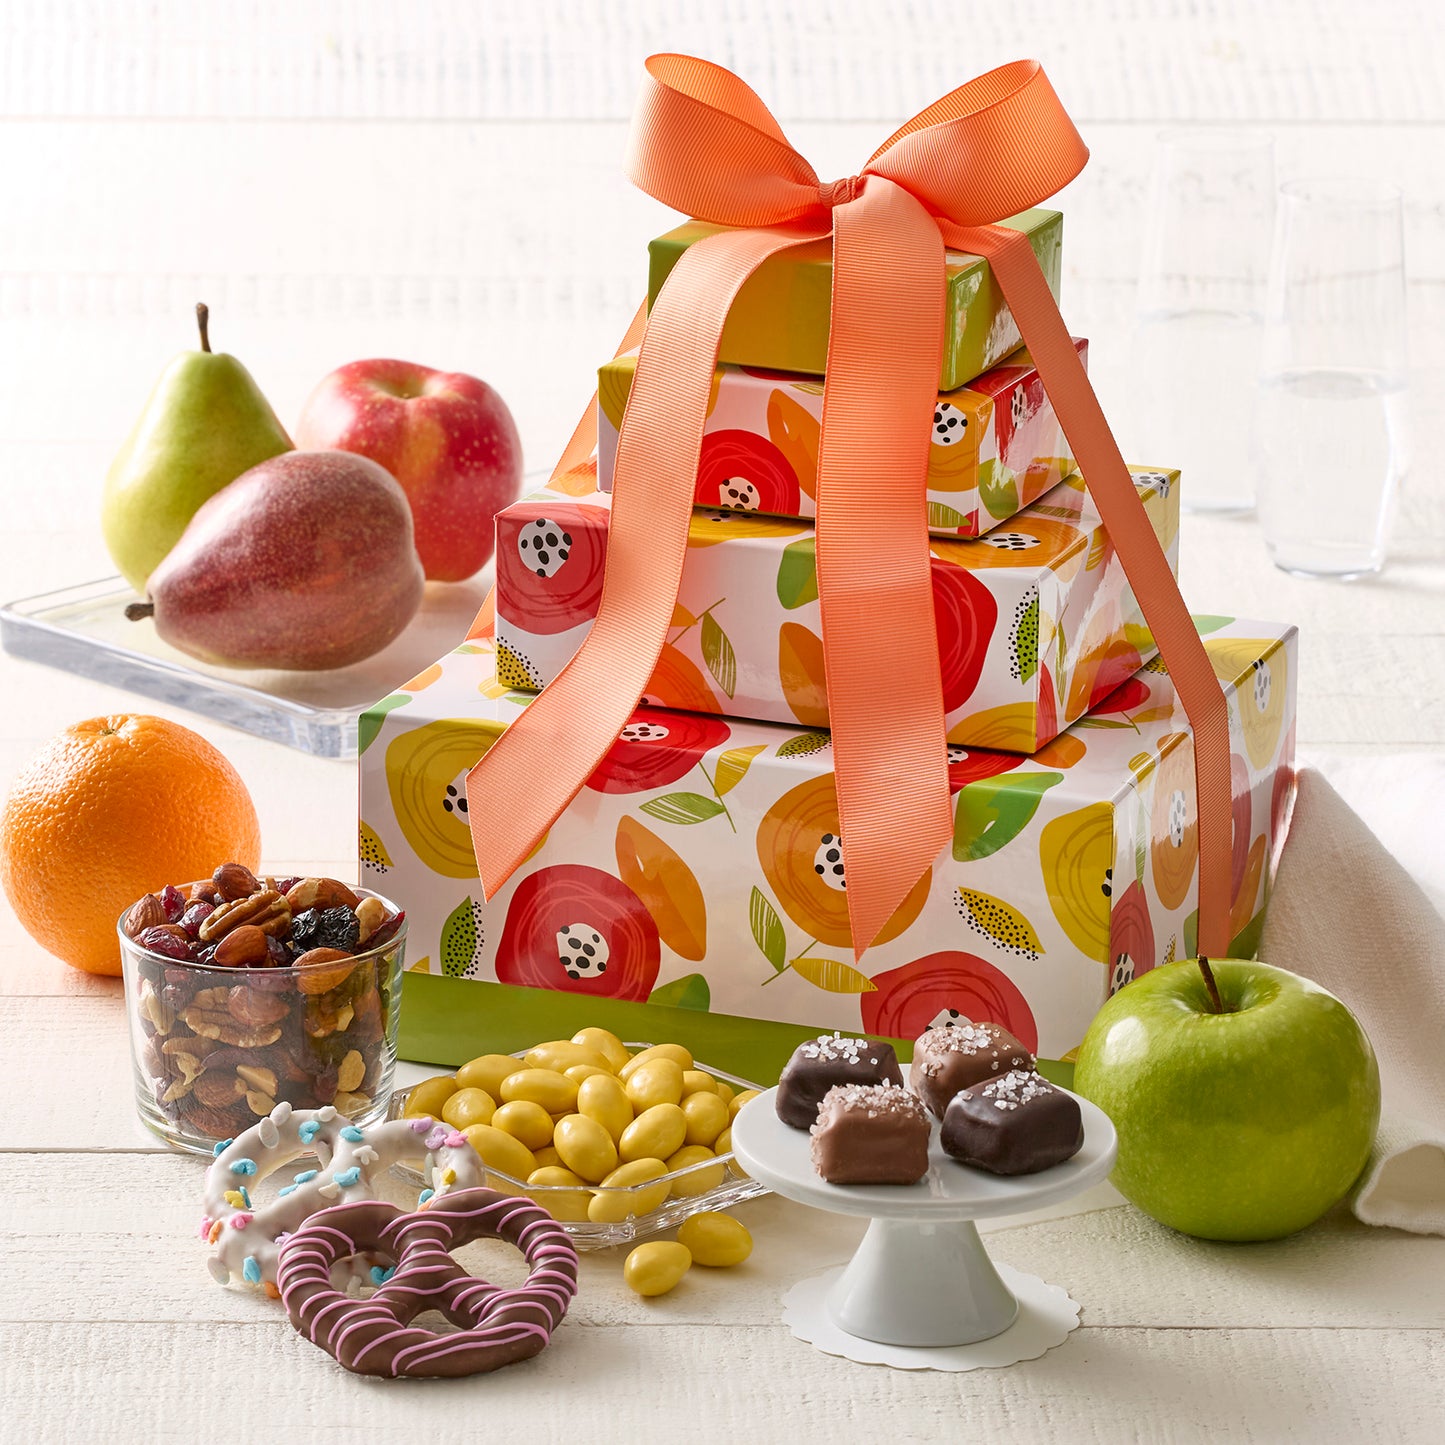 Sunny Days Fruit & Sweets Tower